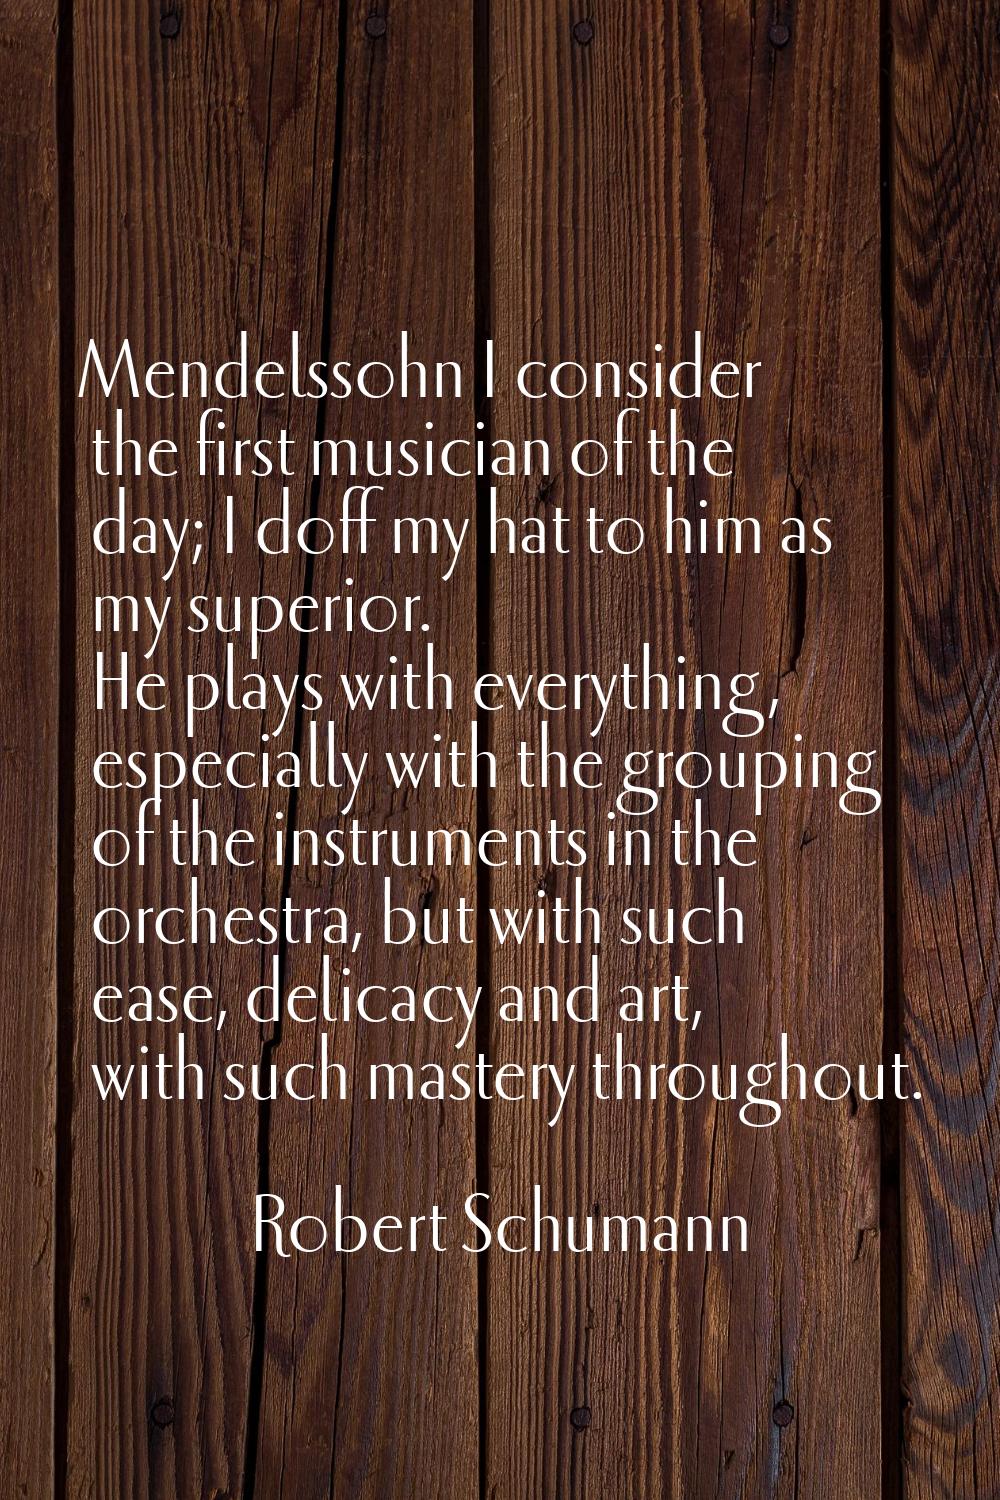 Mendelssohn I consider the first musician of the day; I doff my hat to him as my superior. He plays